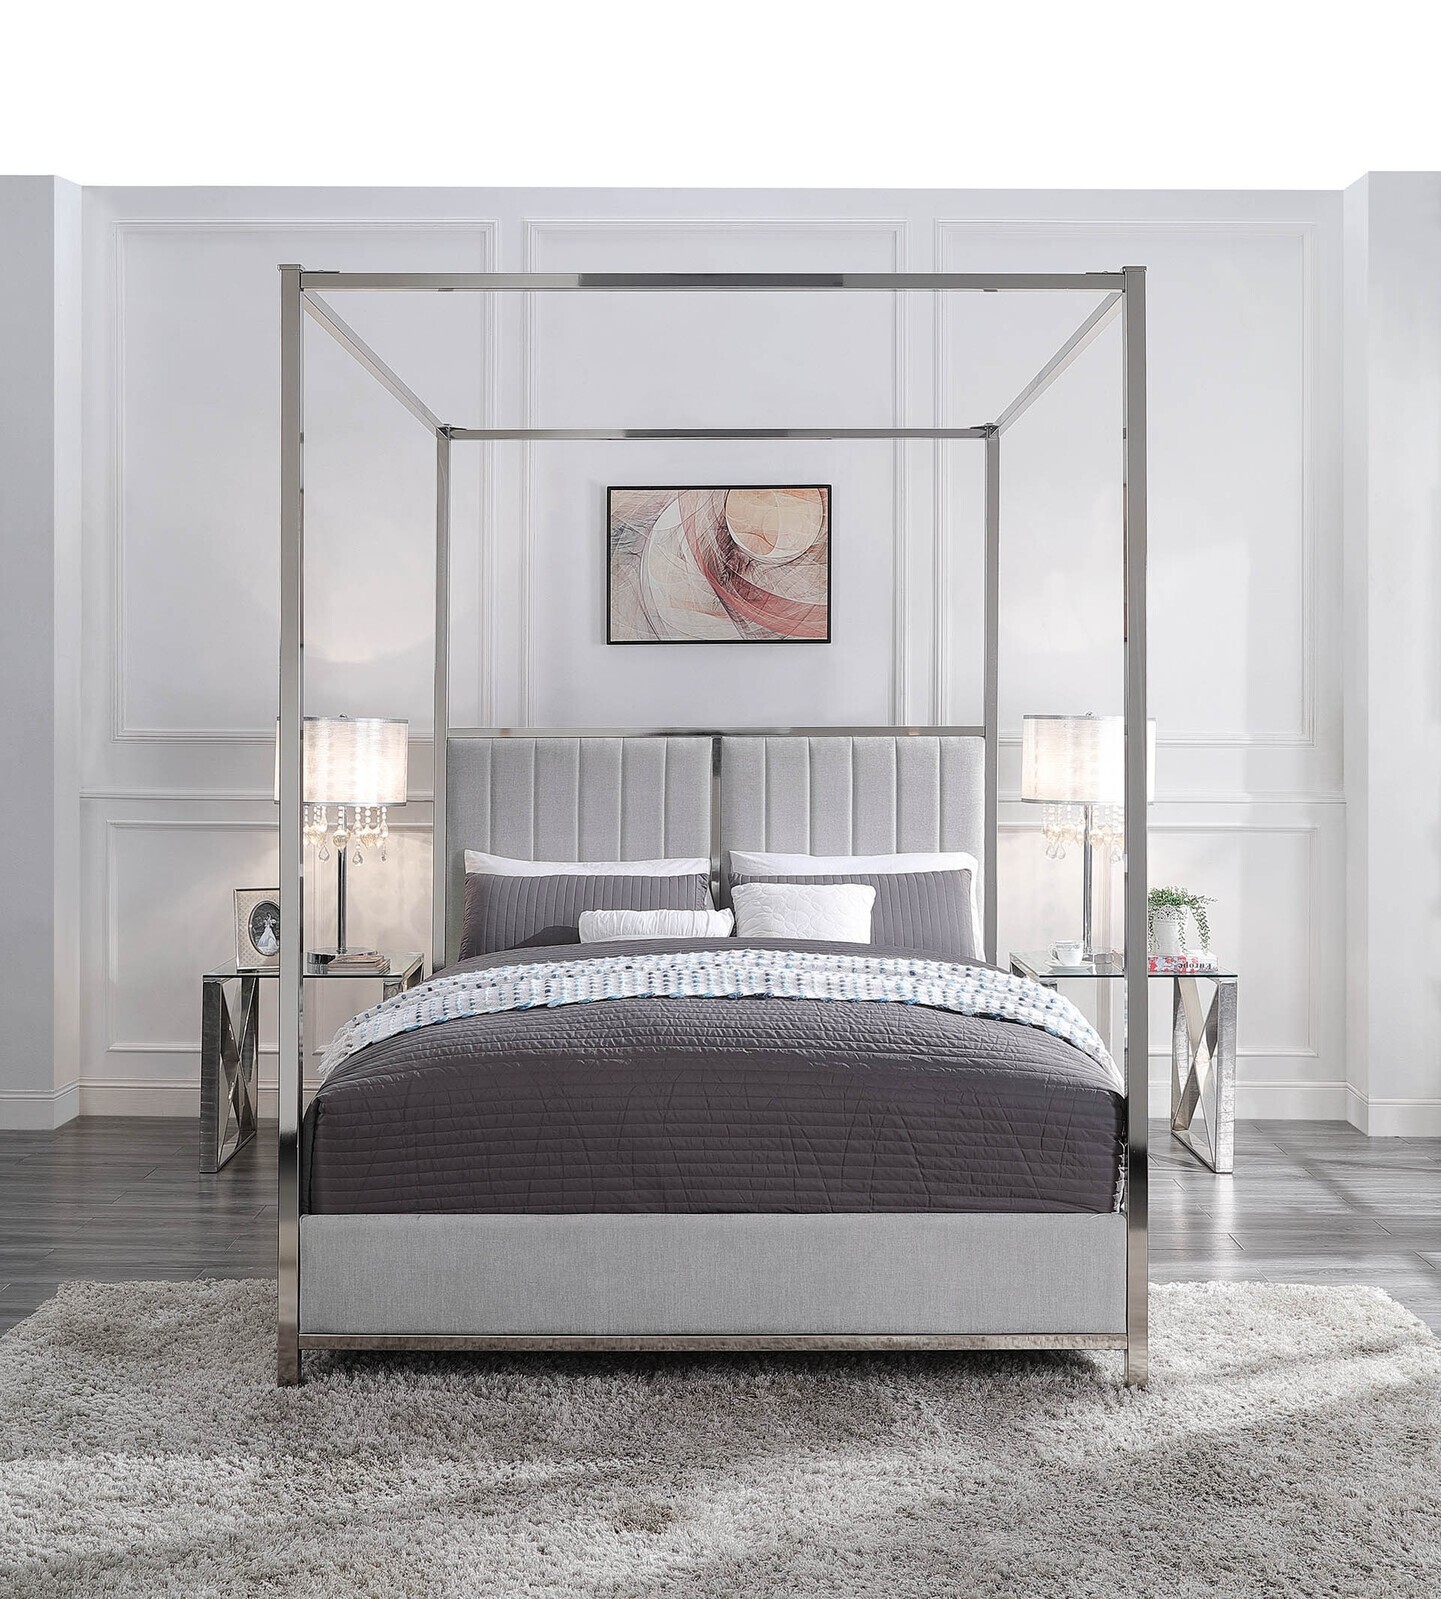 Kingston 4 Poster Upholstered Bed Chrome Plated Bed - Queen Bed